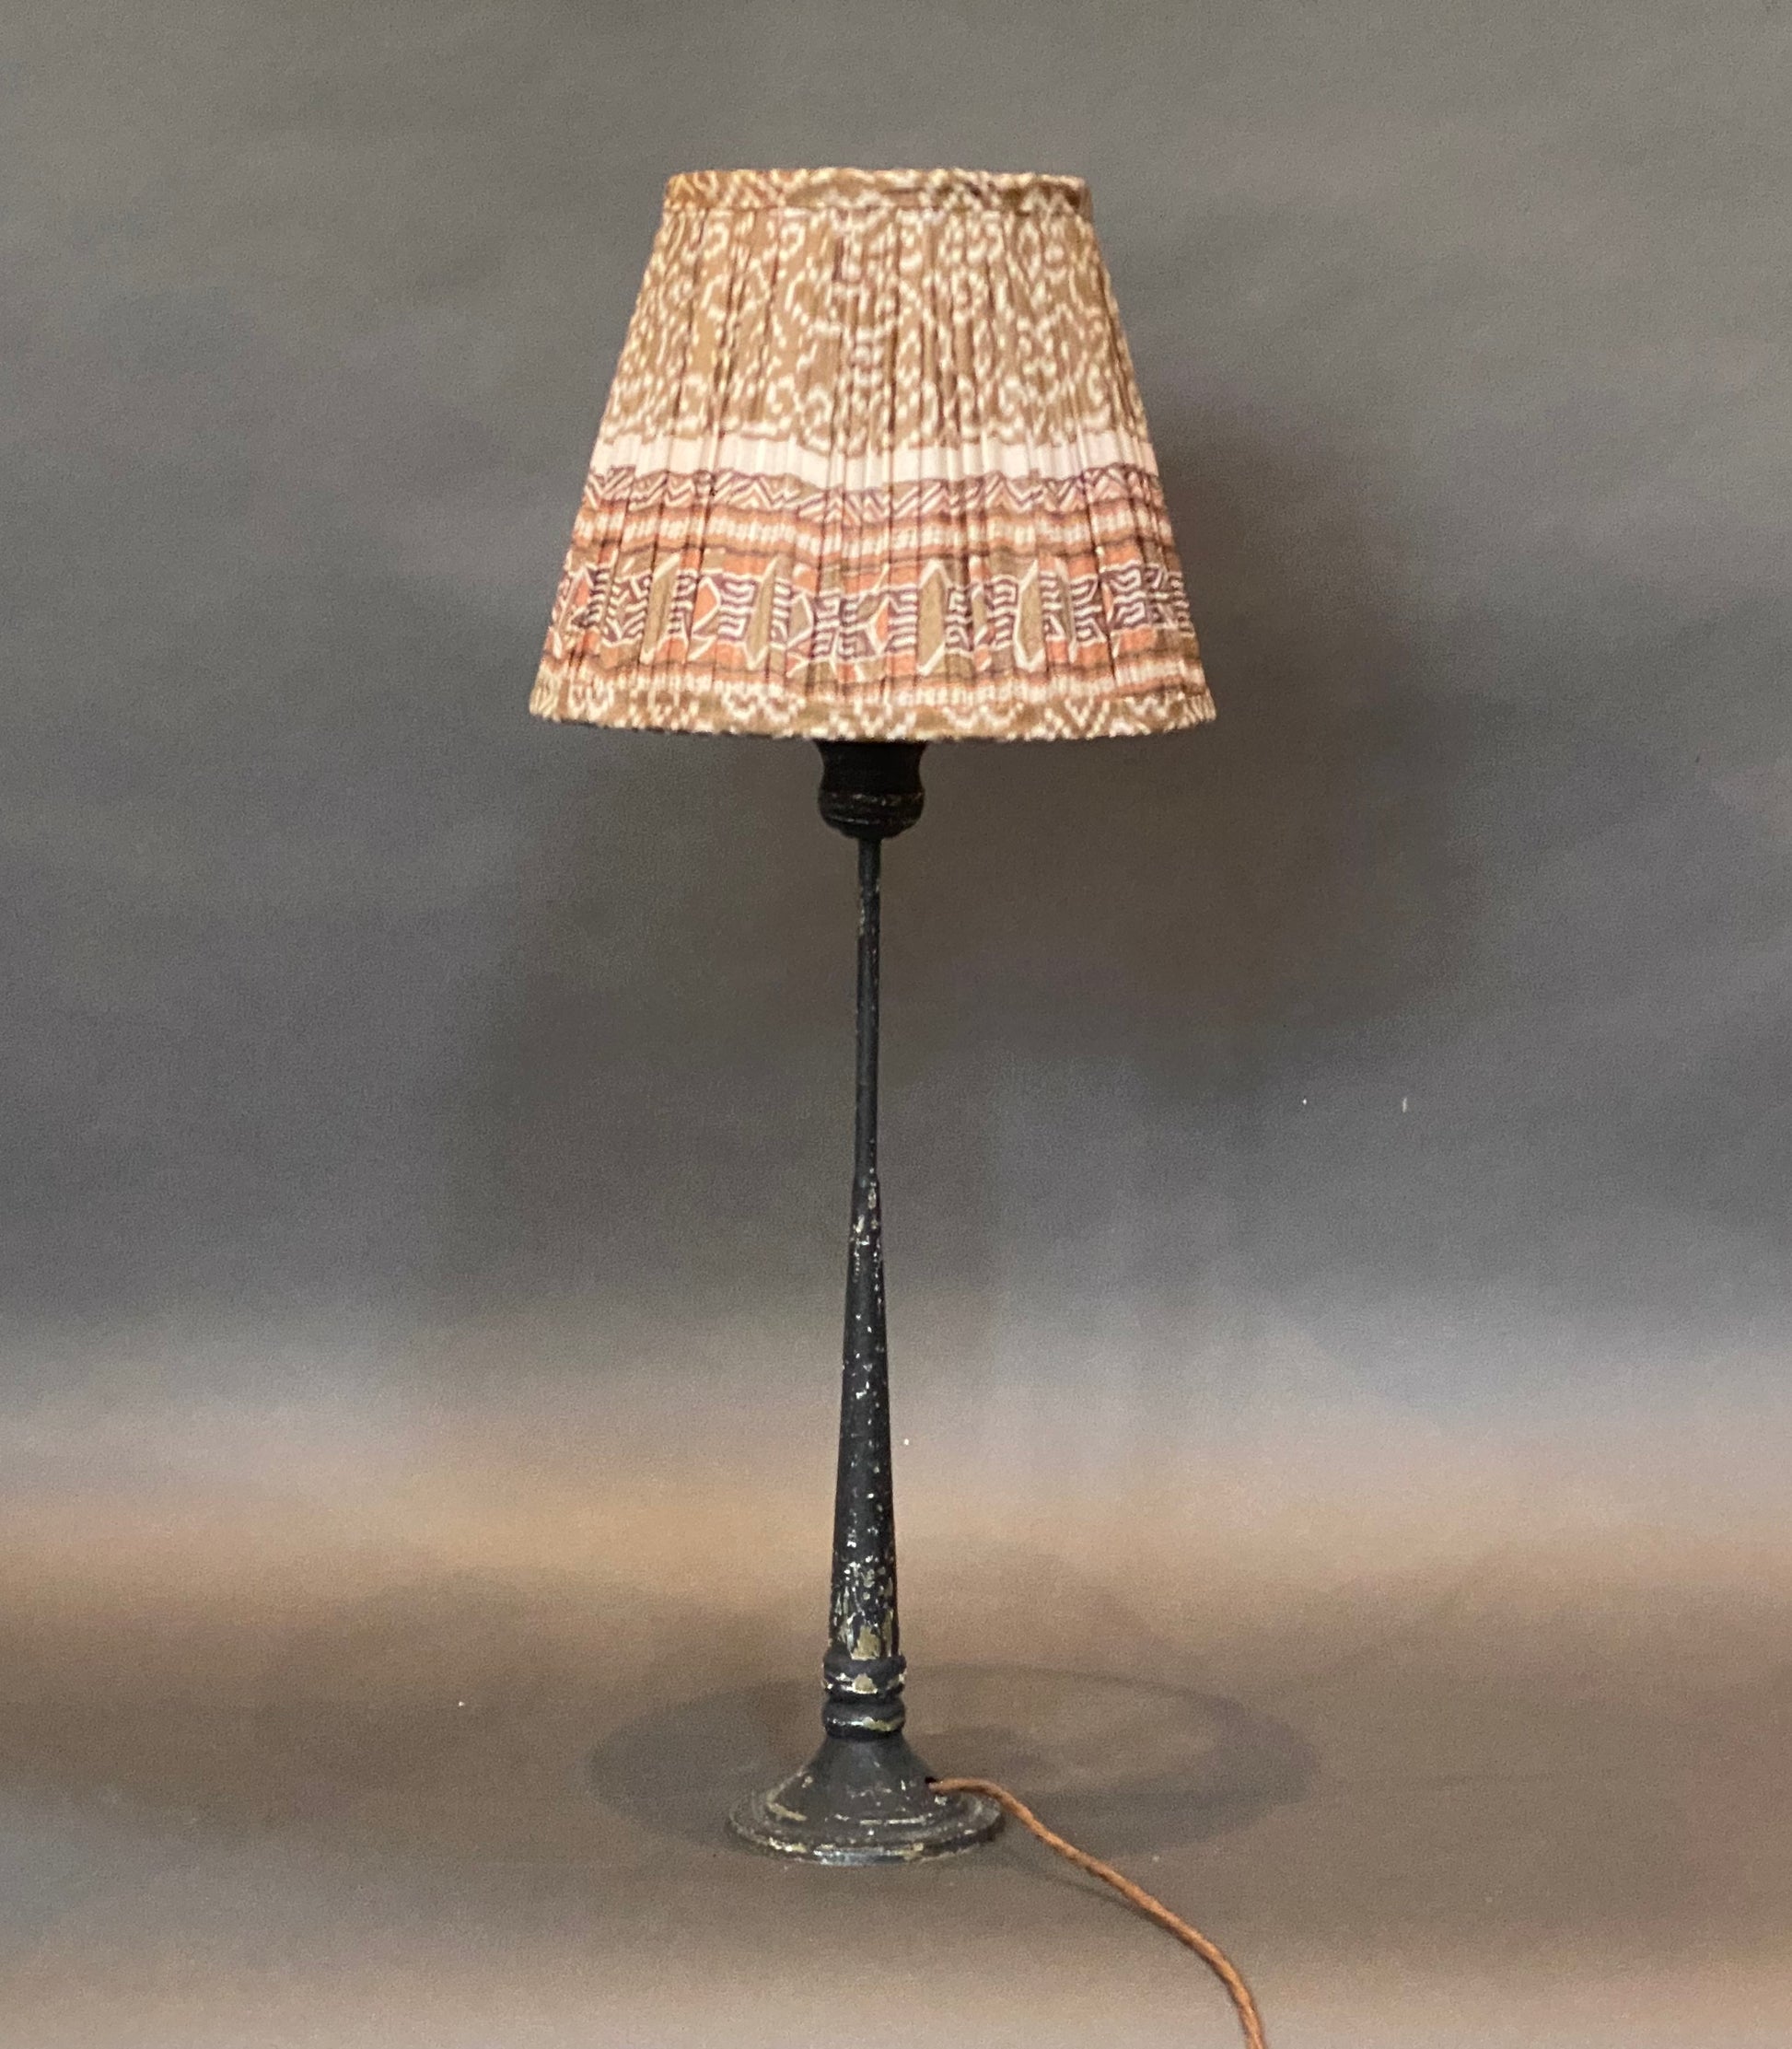 Donkey geometric with border silk lampshade shown on a candlestick lamp base